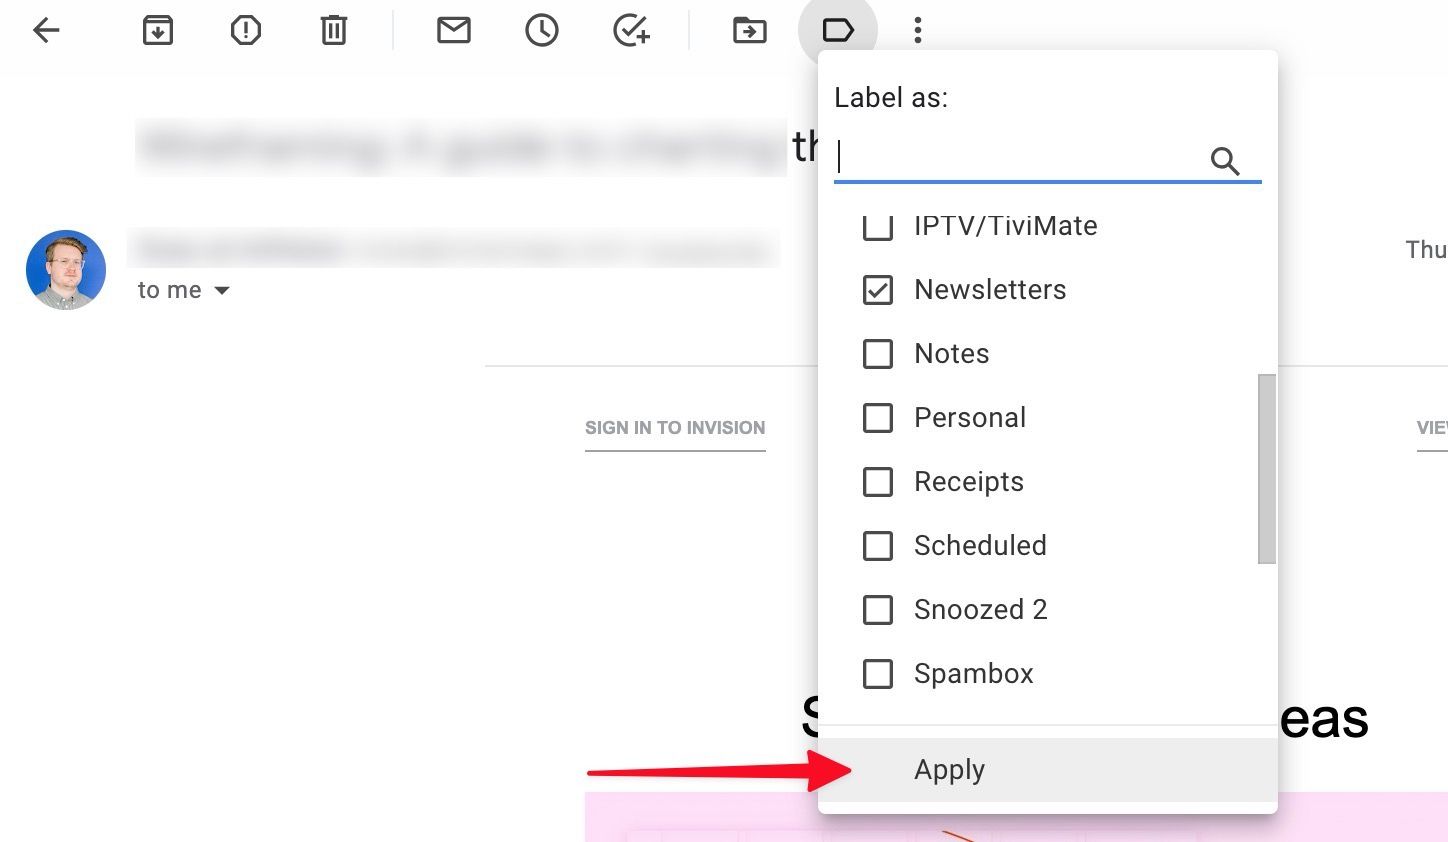 Select the labels to add to the Gmail message